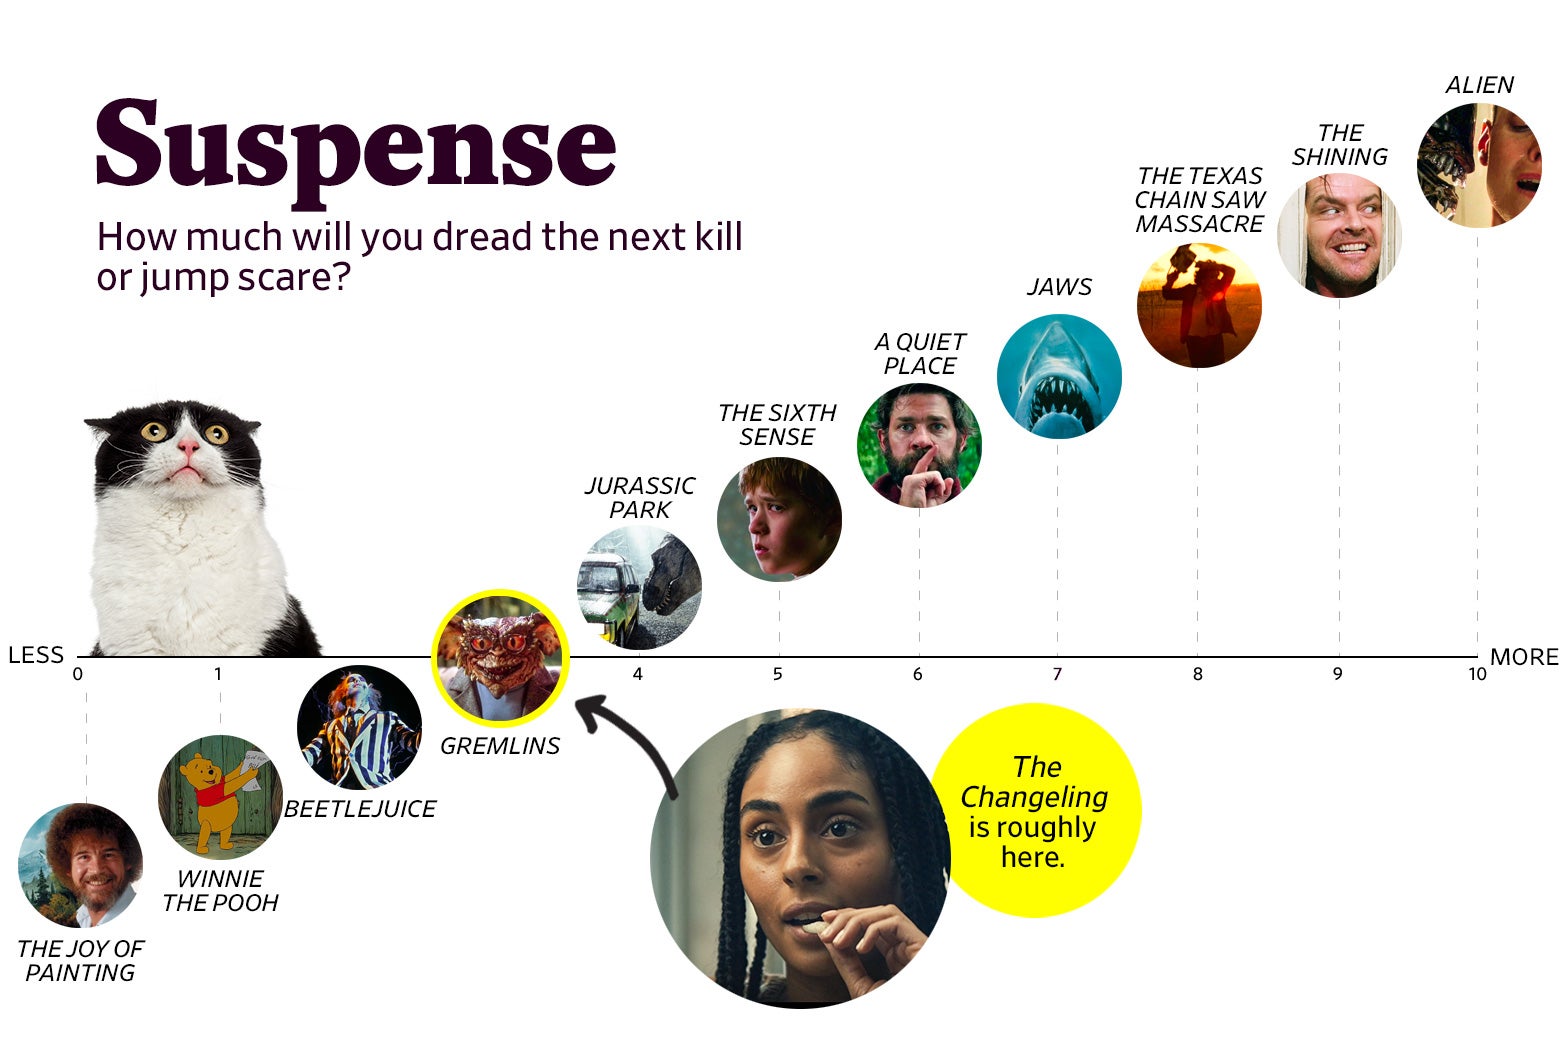 A chart titled “Suspense: How much will you dread the next kill or jump scare?” shows that The Changeling ranks a 3 in suspense, roughly the same as Gremlins. The scale ranges from The Joy of Painting (0) to Alien (10).